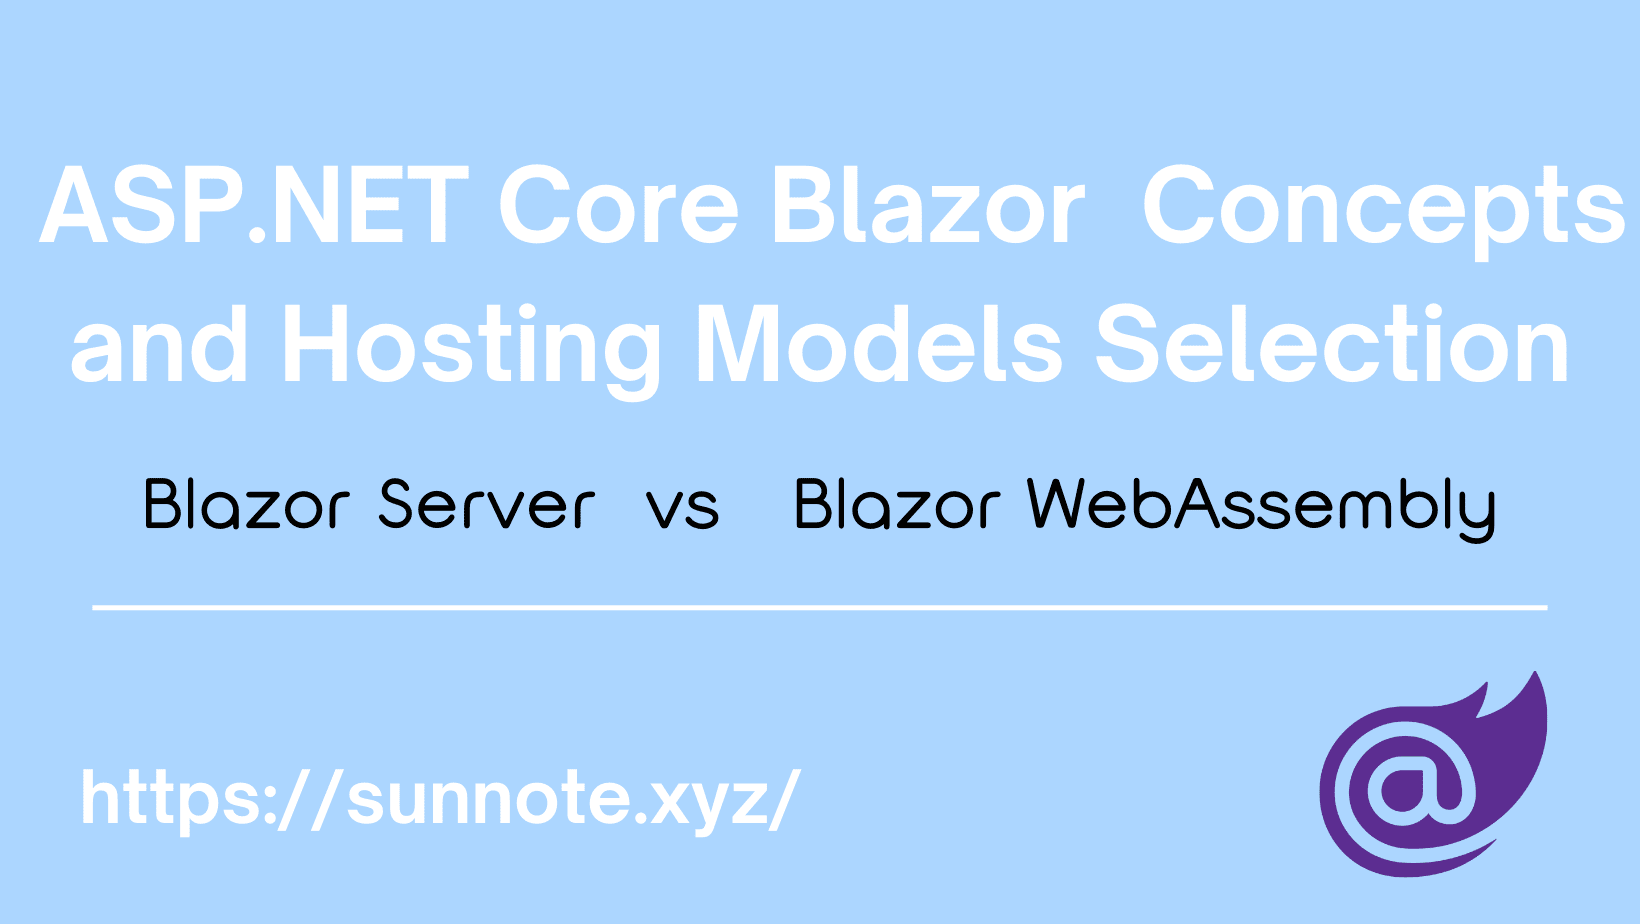 ASP.NET Core Blazor Basic Concepts and Hosting Models Selection